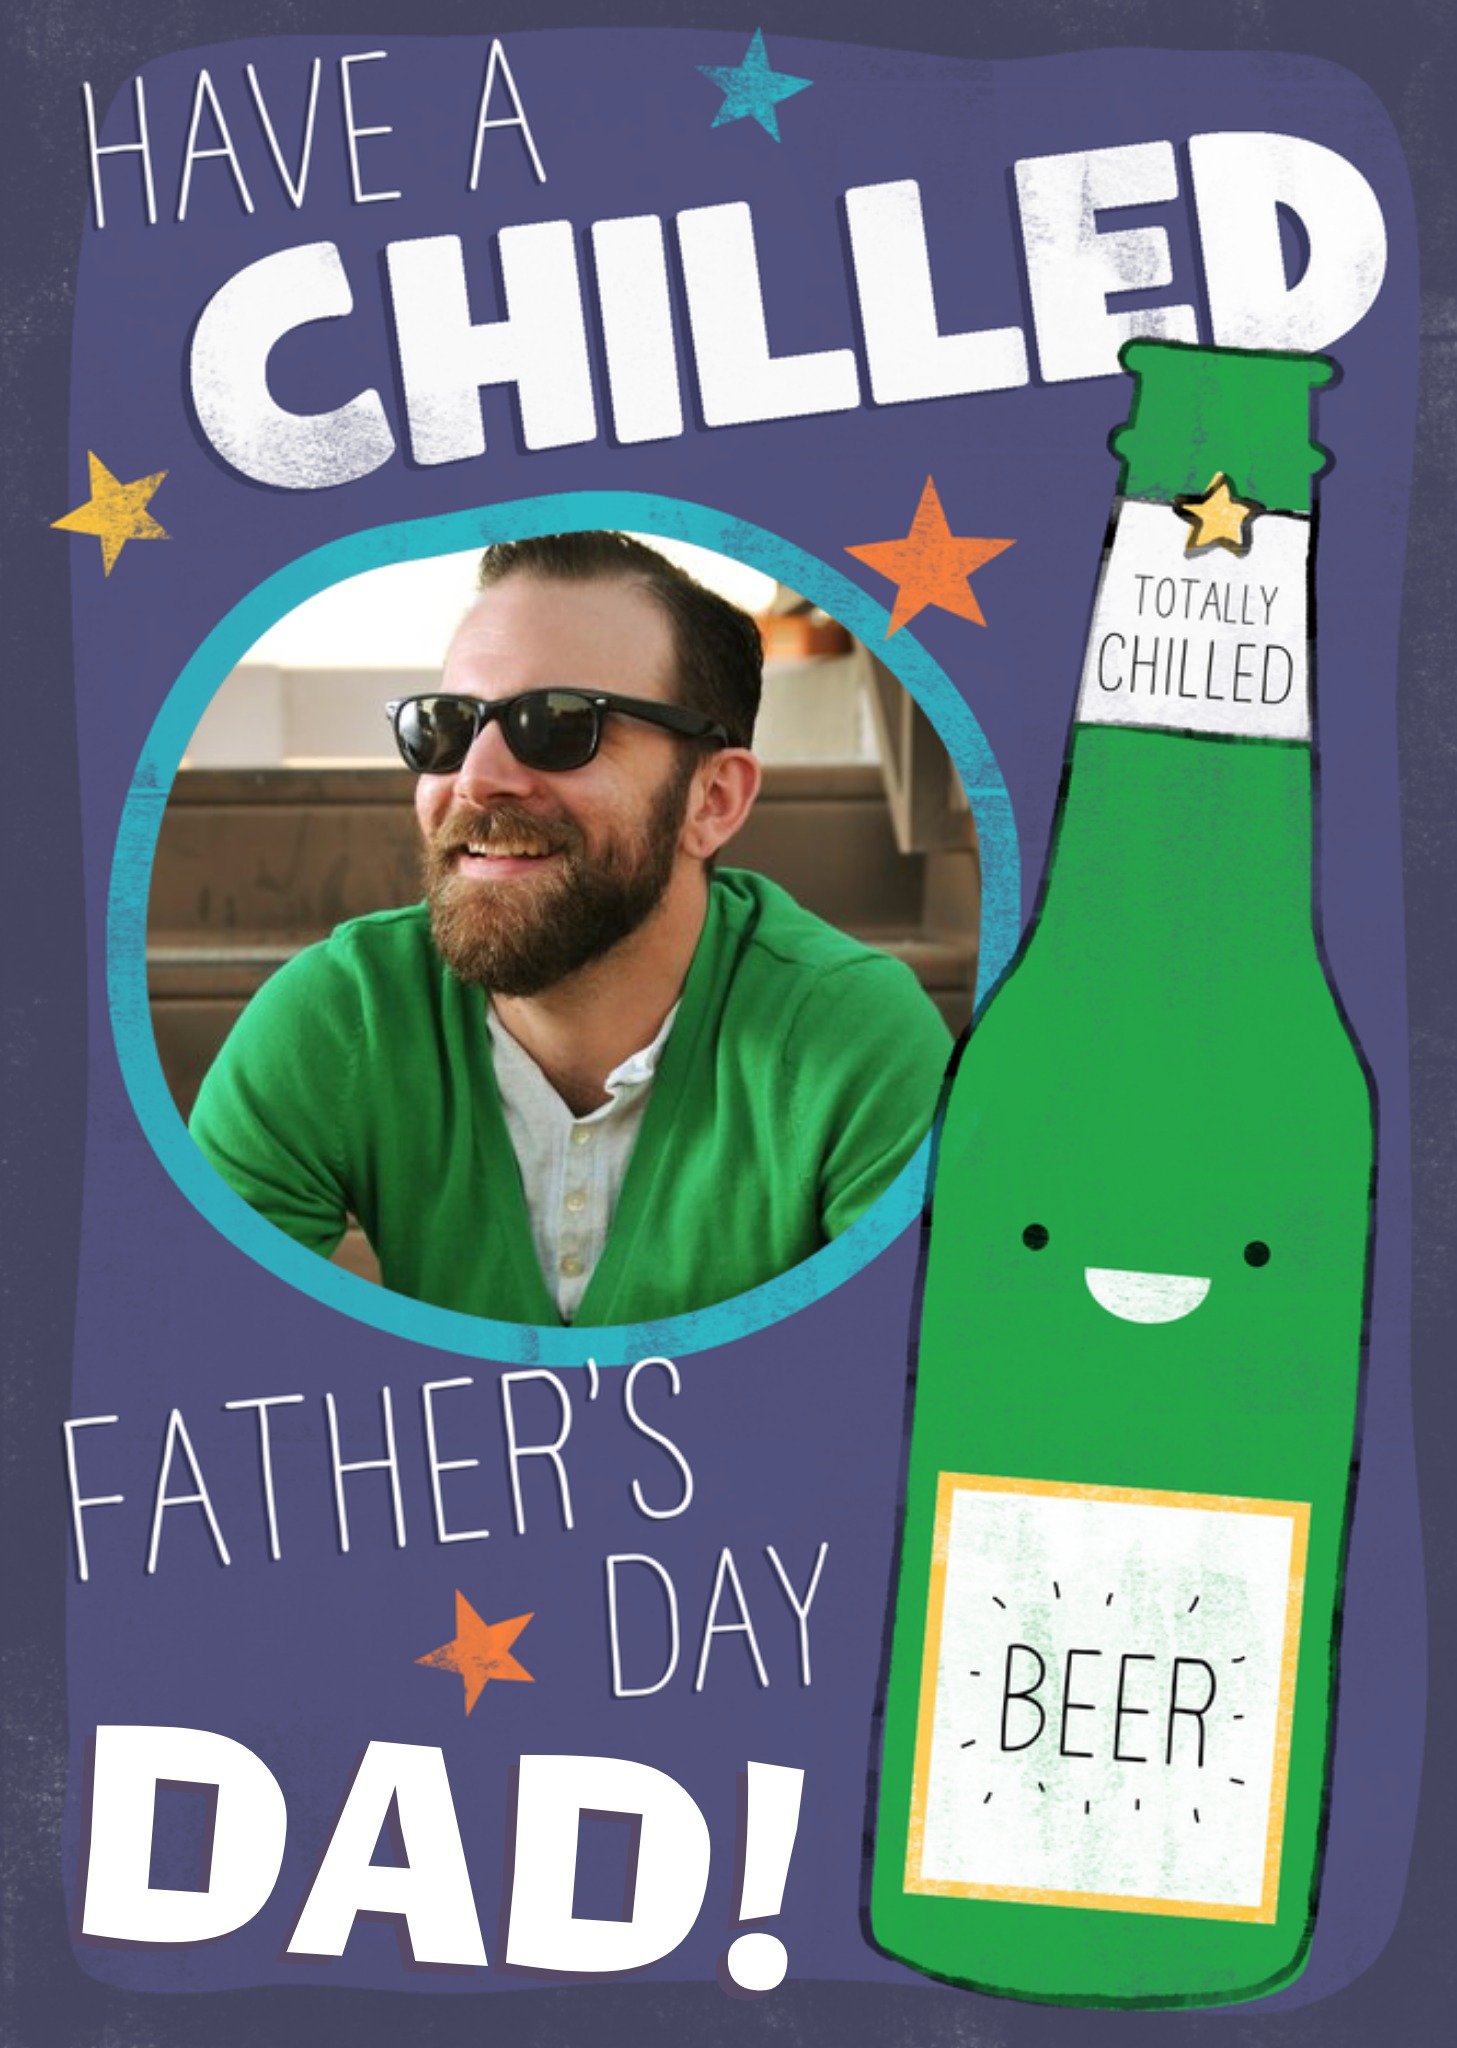 Moonpig Totally Chilled Beer Personalised Photo Upload Happy Father's Day Card, Large